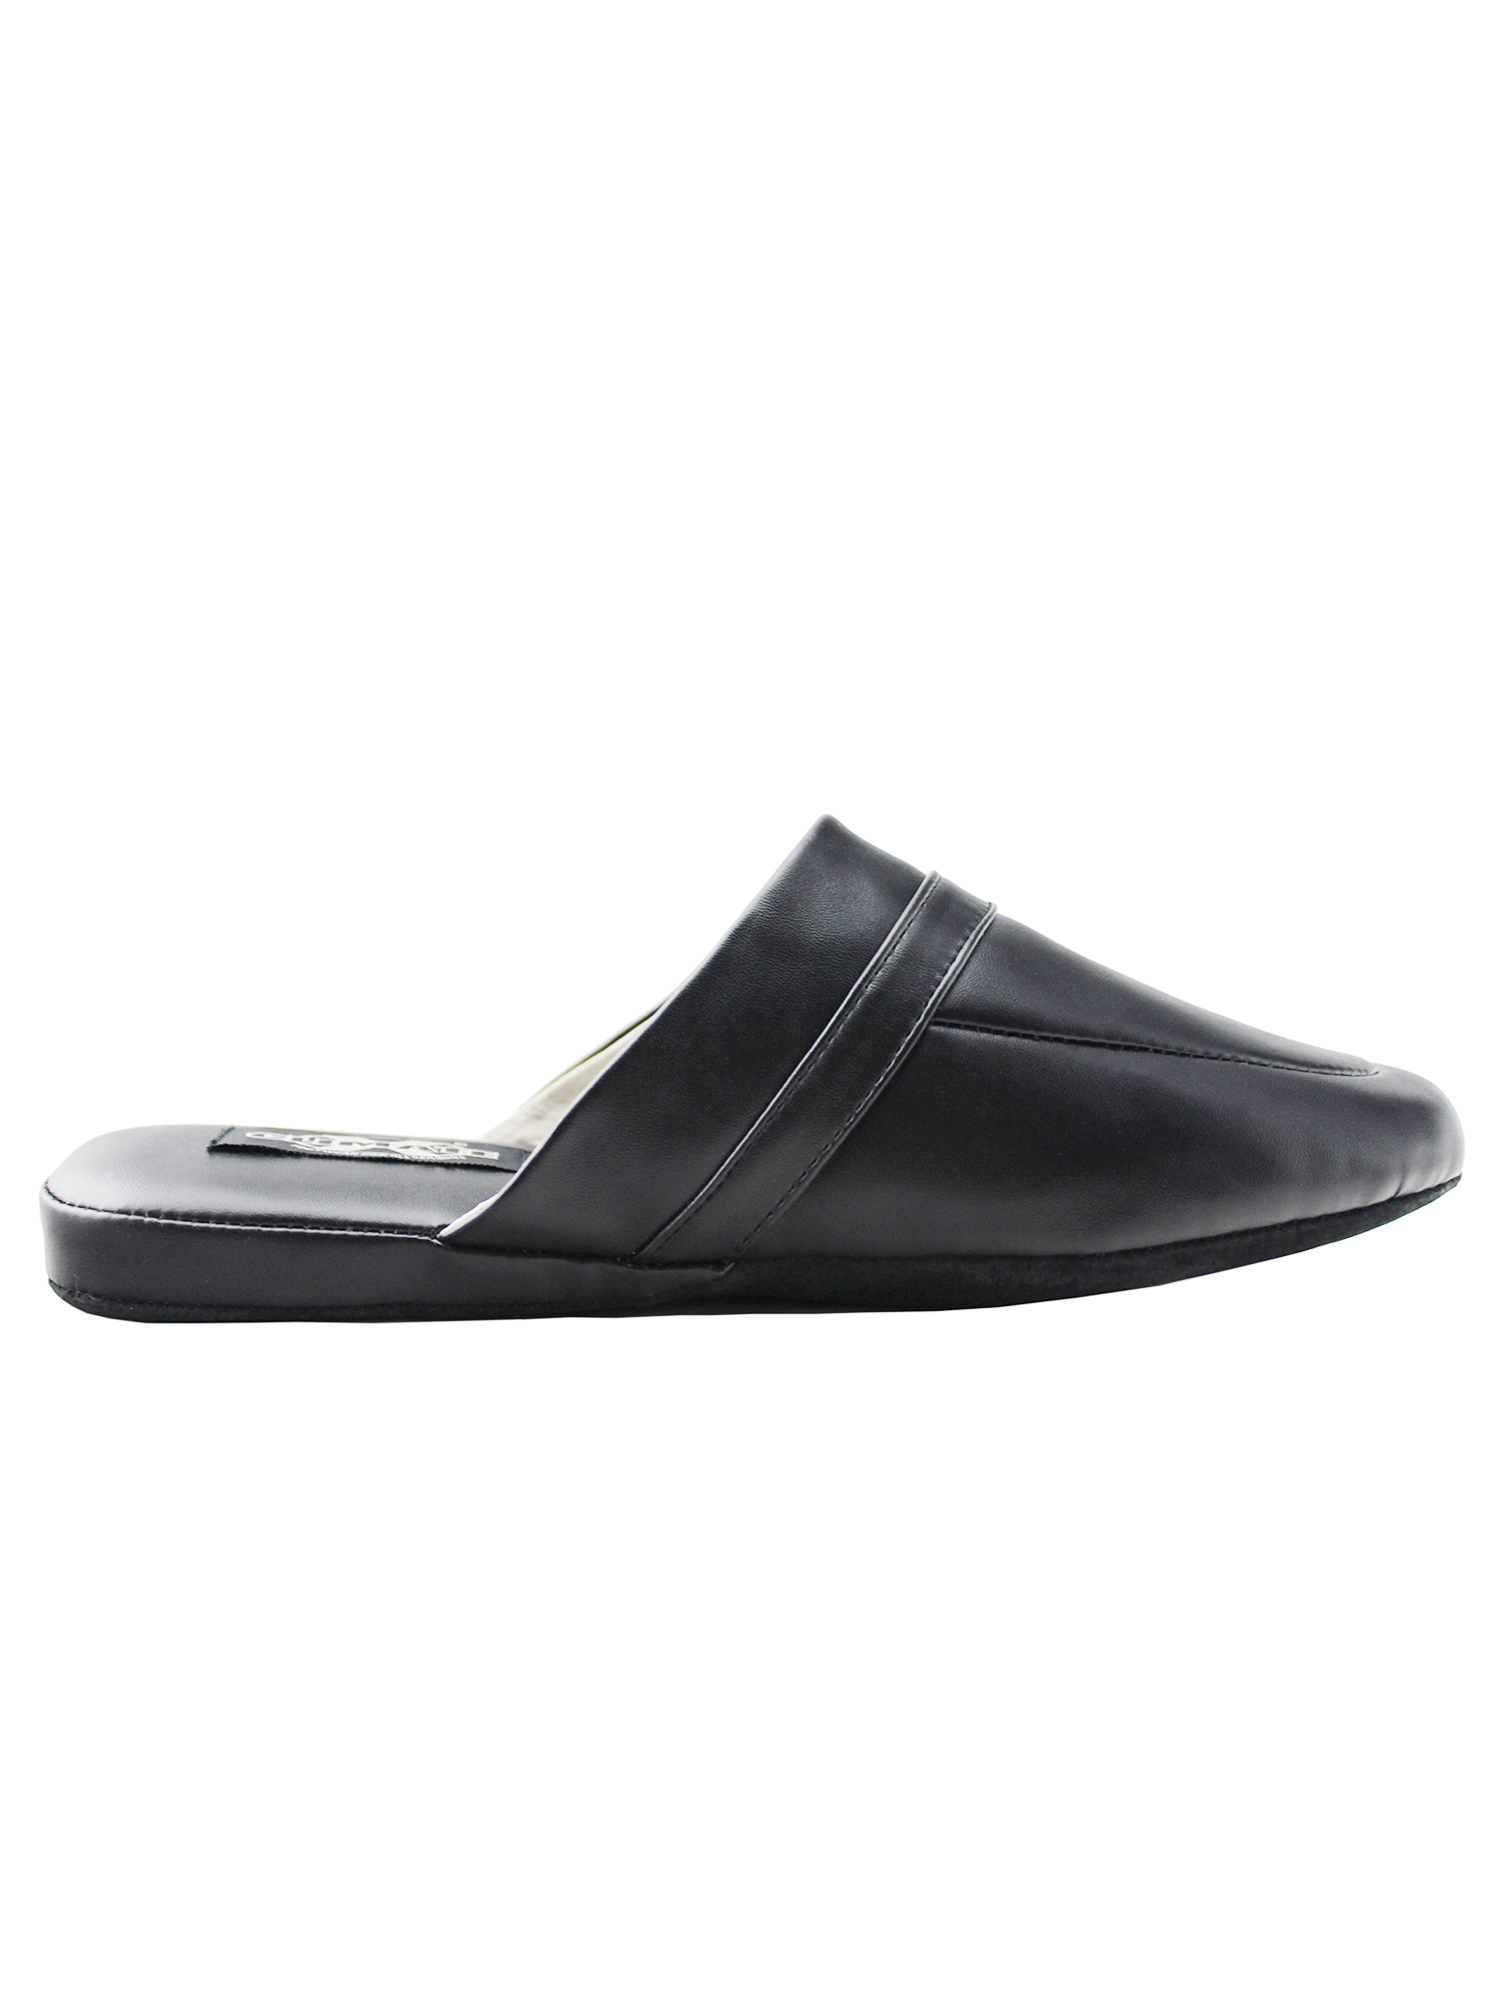 Mens Leather Slippers Open Back Slides for Men Comfortable Indoor Home Shoes - image 3 of 6